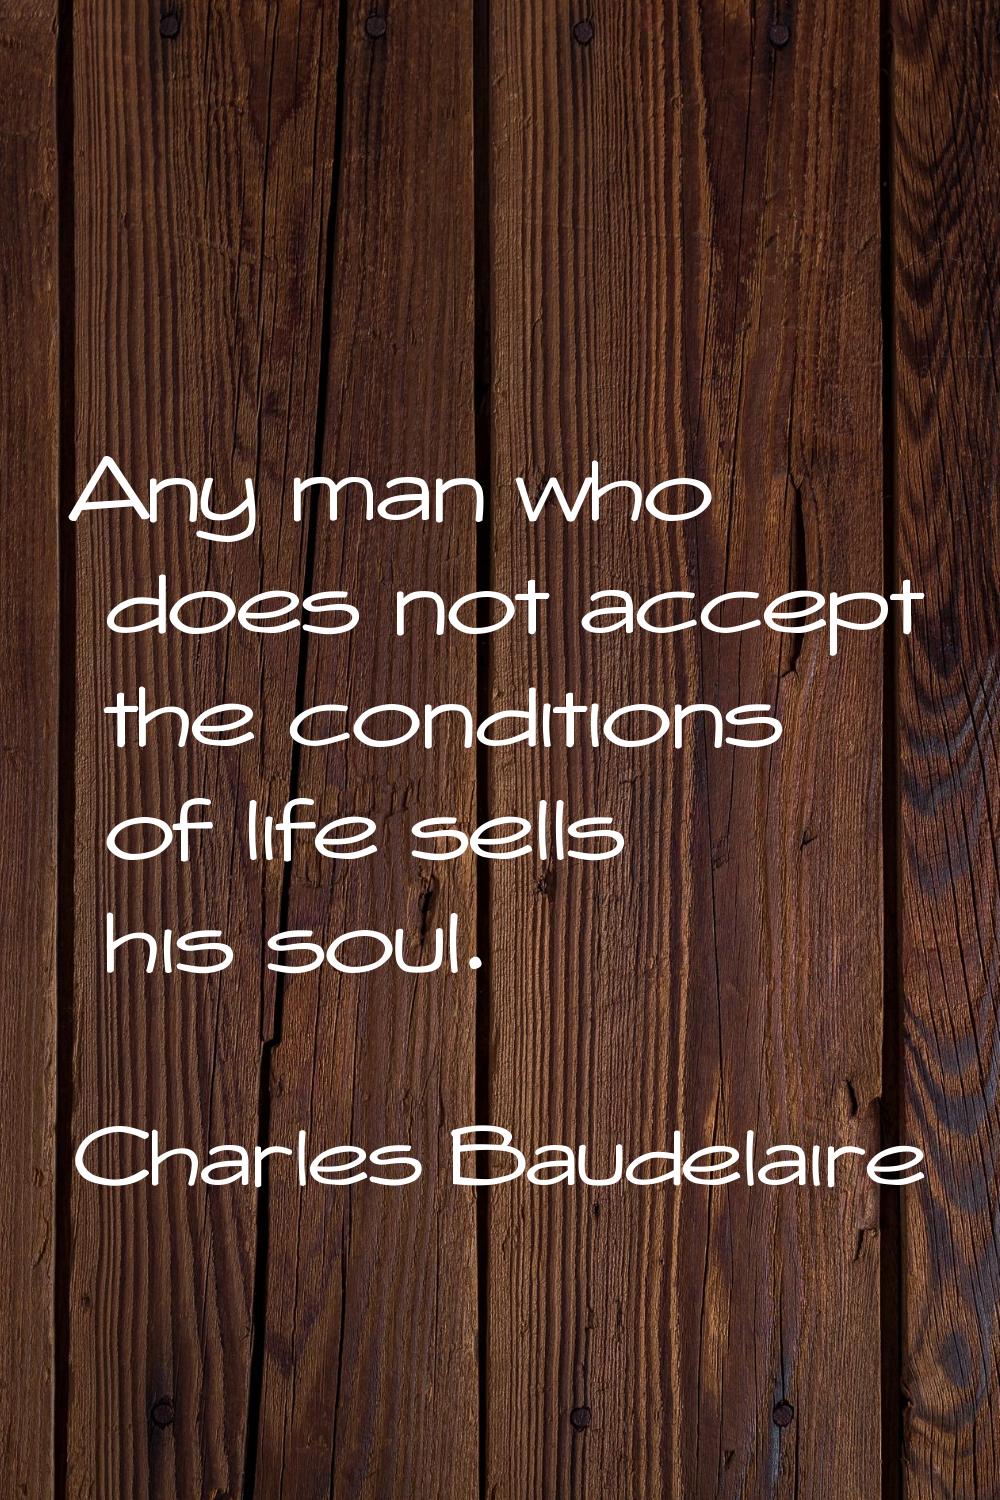 Any man who does not accept the conditions of life sells his soul.